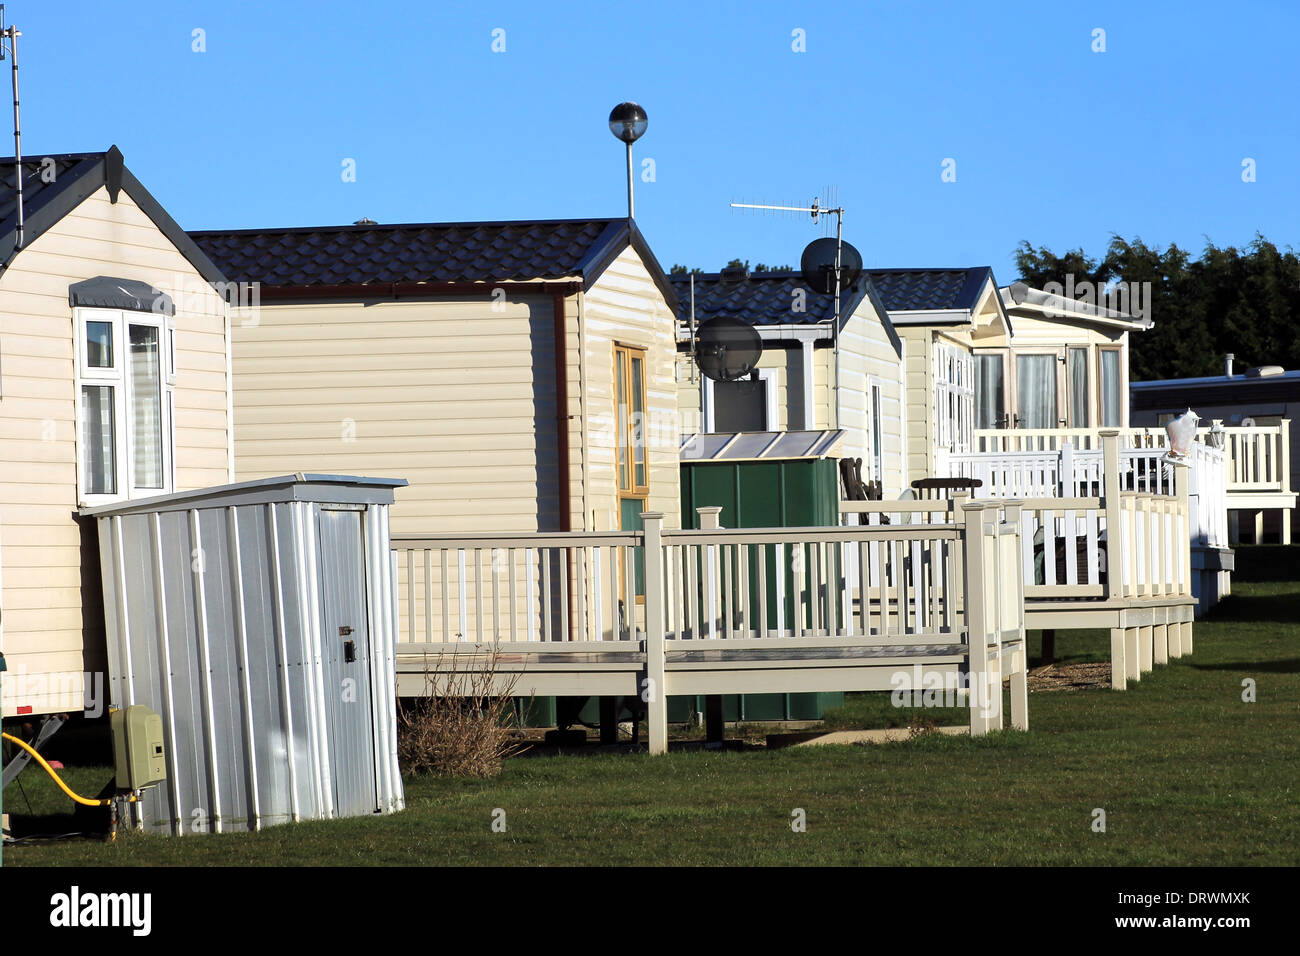 Row of static trailers in caravan park, Scarborough, England. Stock Photo